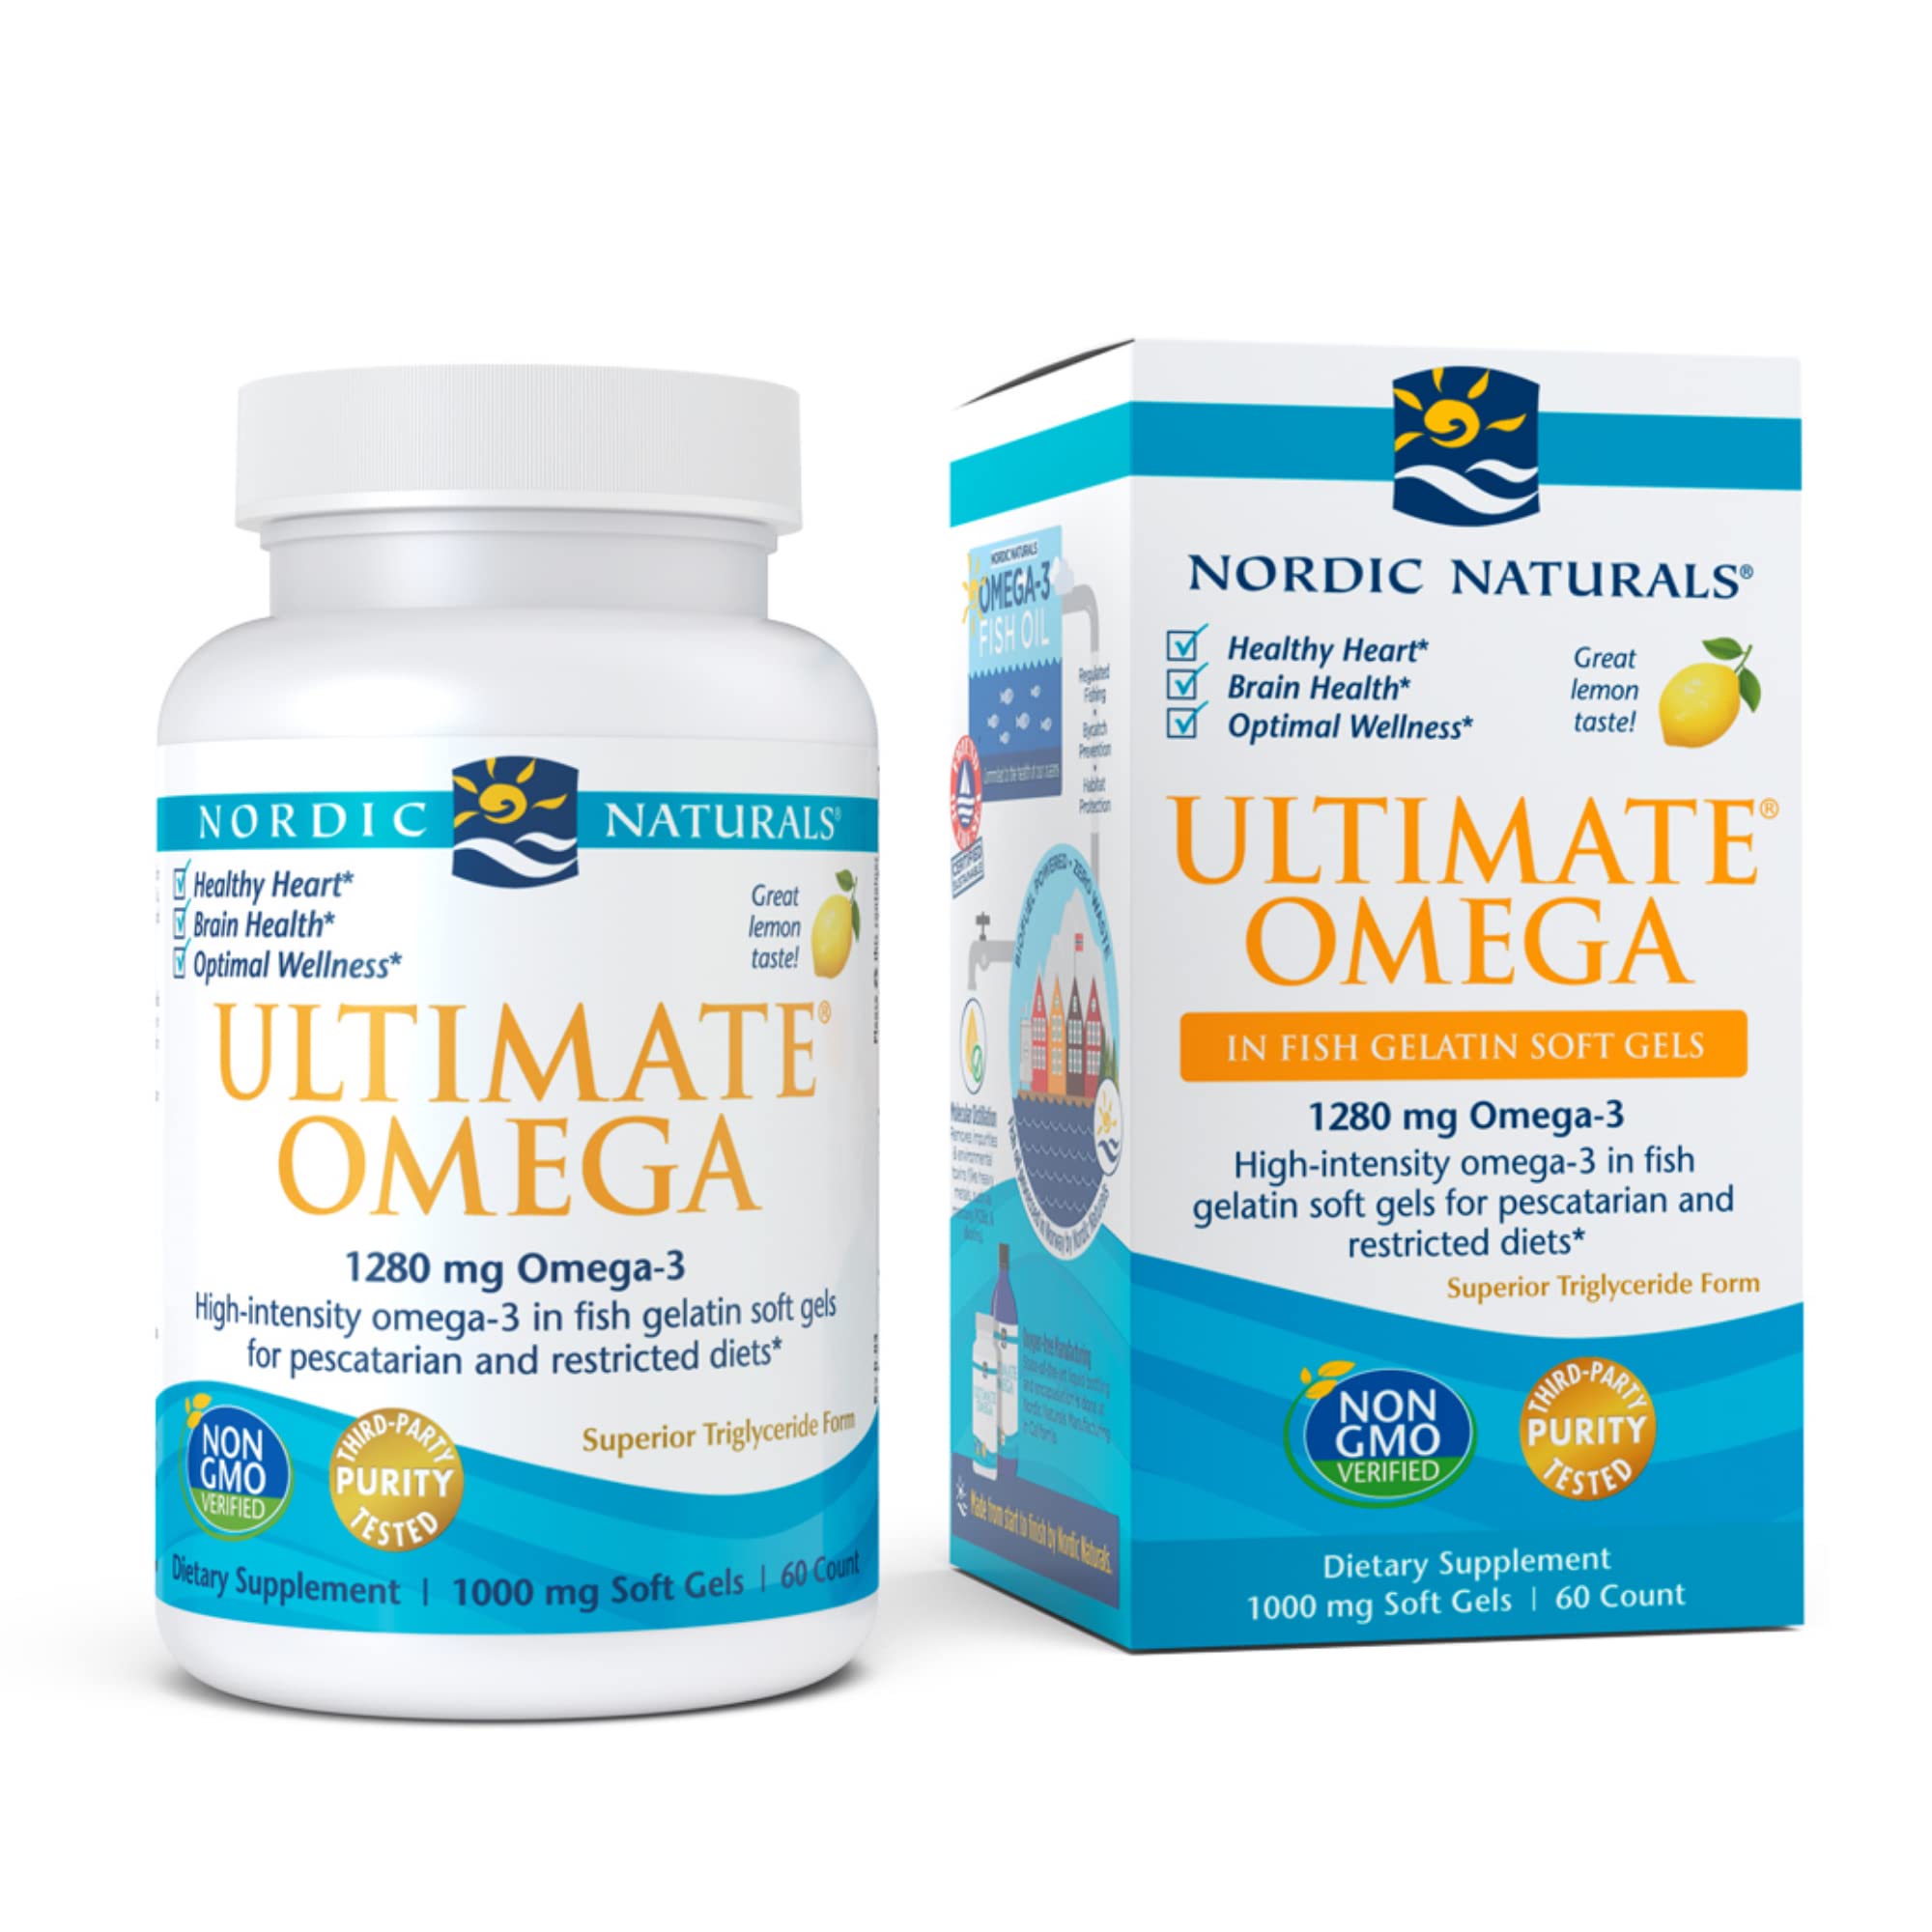 Nordic Naturals Ultimate Omega in Fish Gelatin, Lemon Flavor - 1280 mg Omega-3-60 Soft Gels - High-Potency Fish Oil Supplement - EPA & DHA - Promotes Brain & Heart Health - Non-GMO - 30 Servings